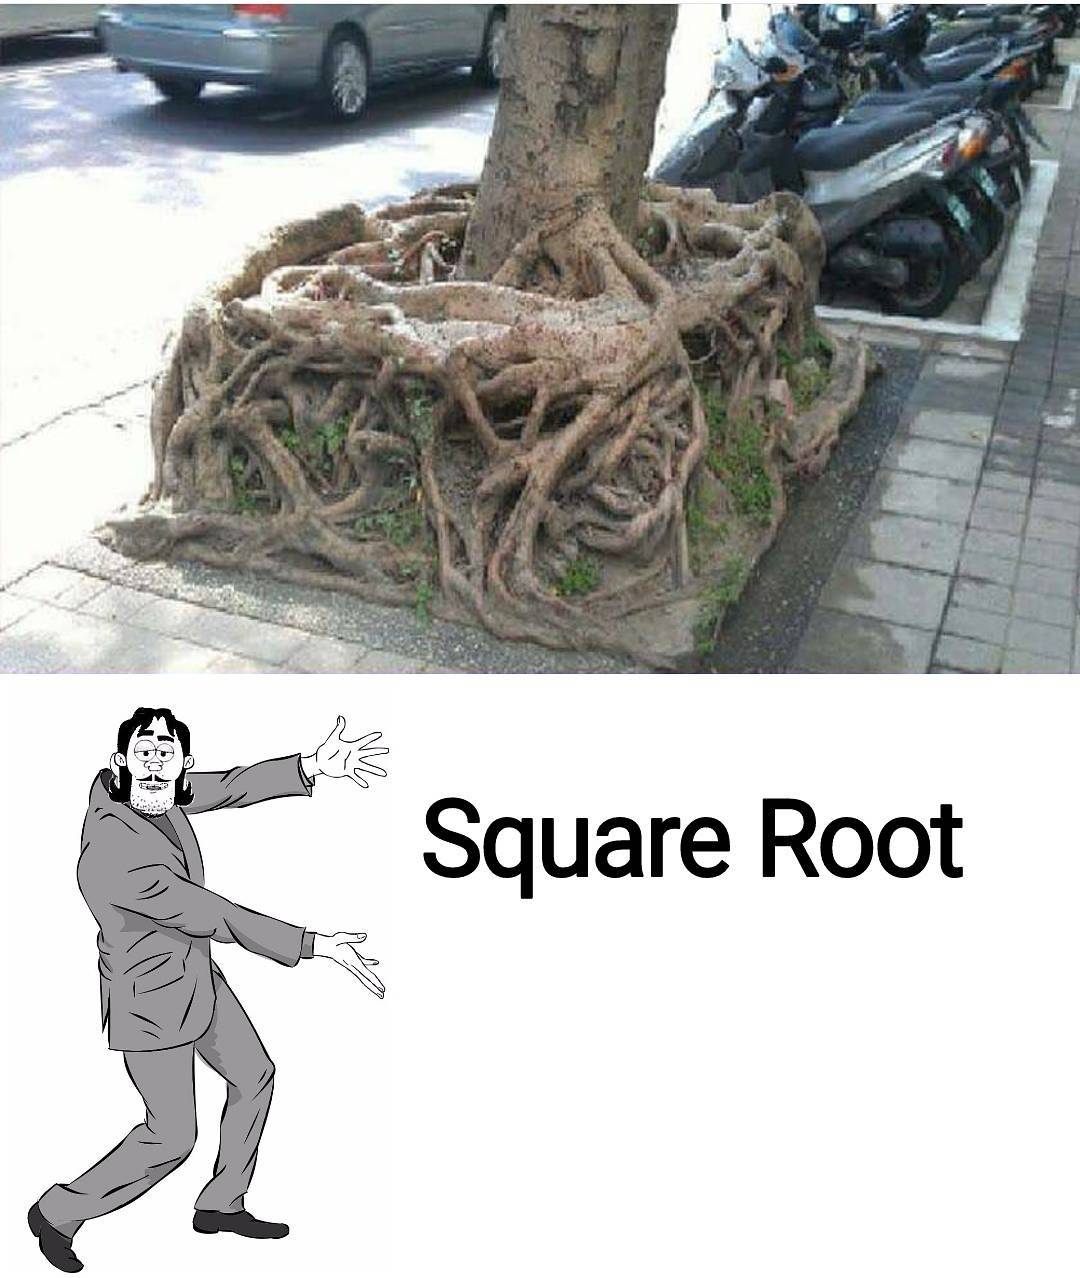 finally found the square root - So Square Root